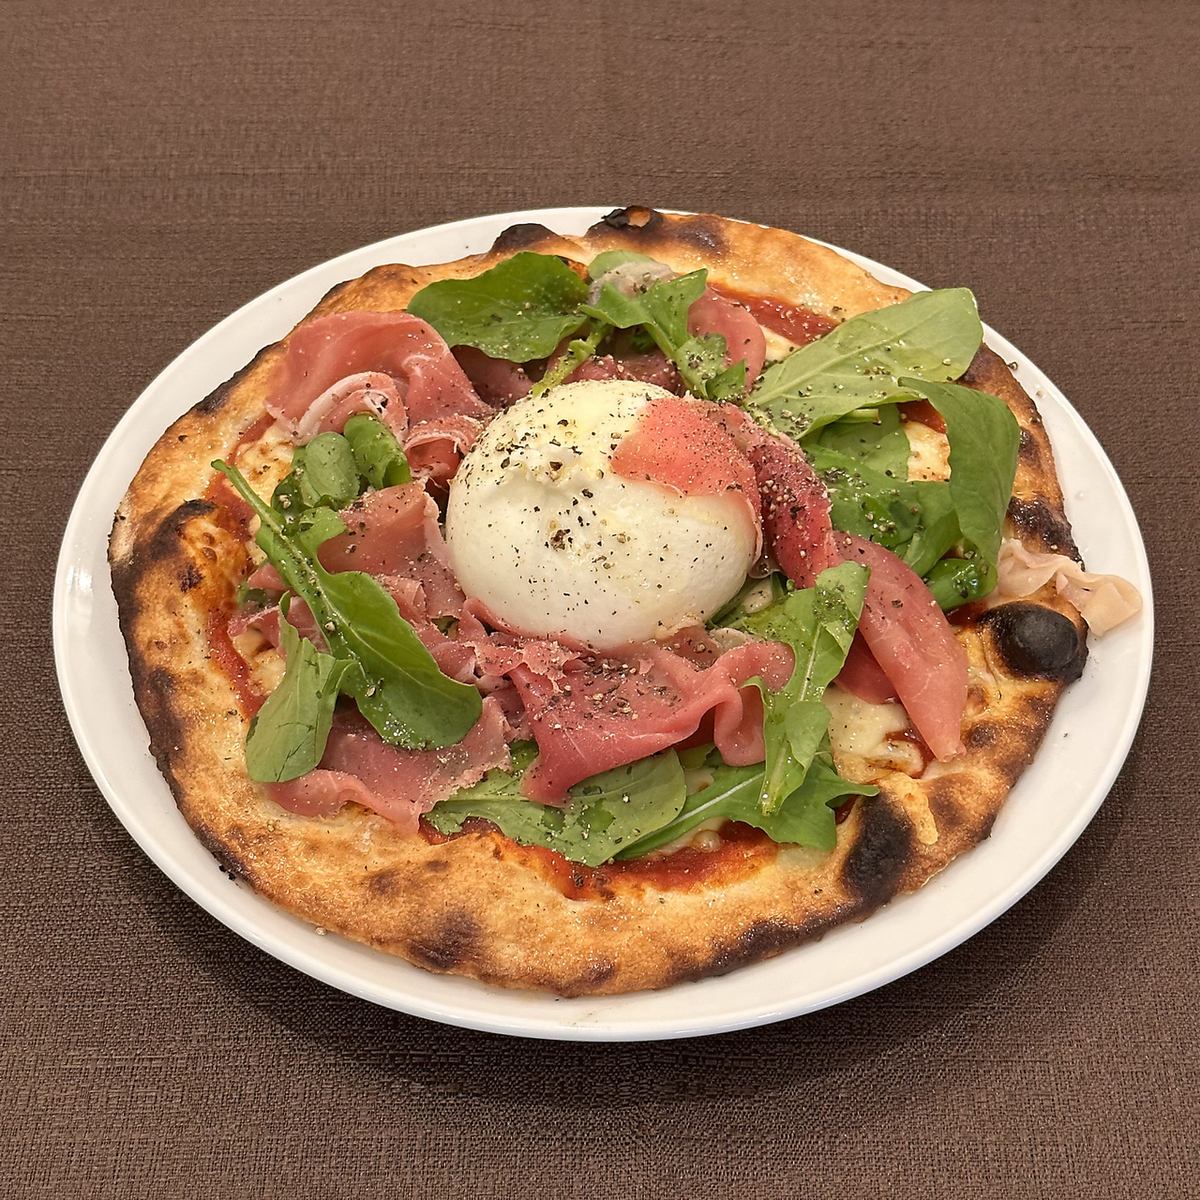 Our recommended dish is "Burrata and prosciutto pizza"